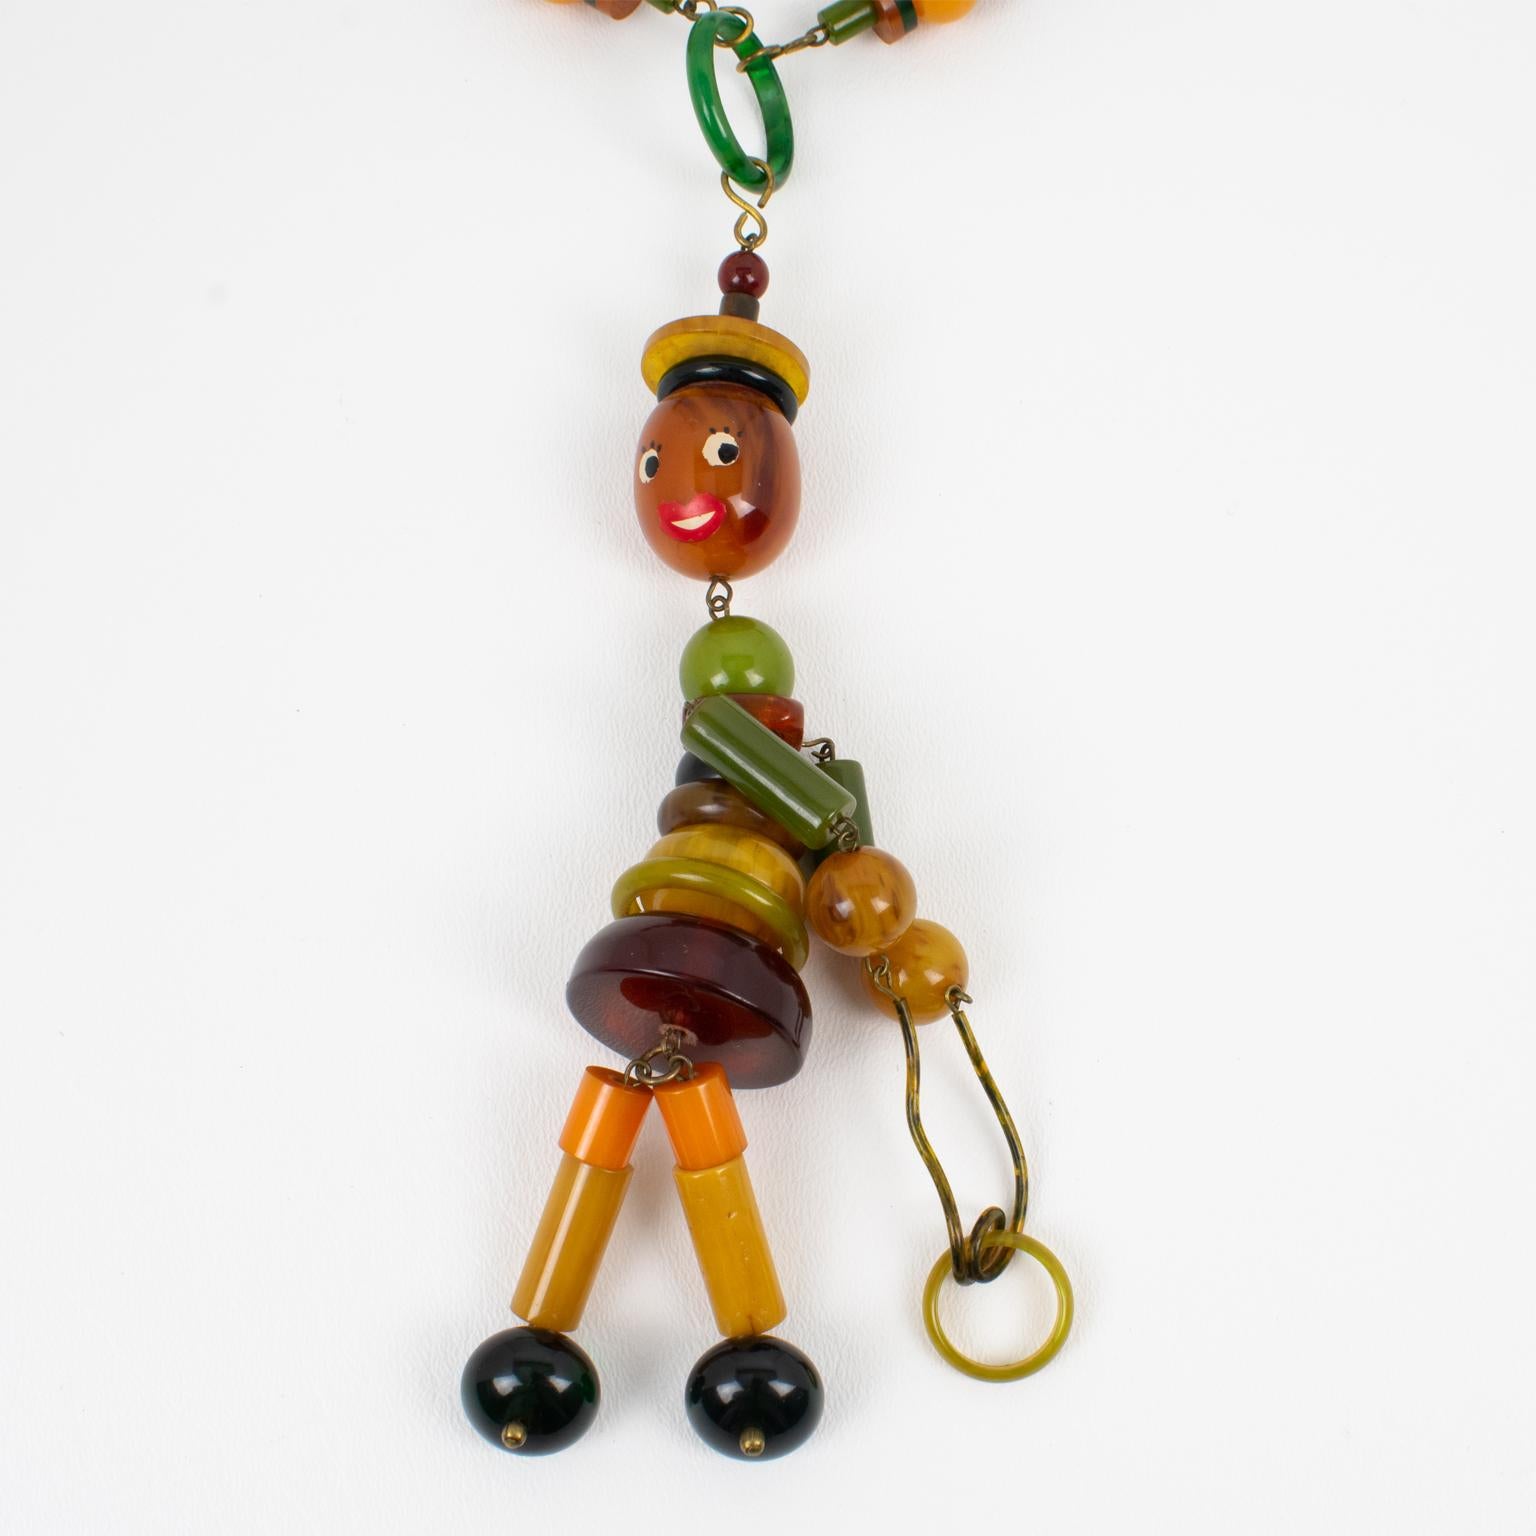 Multicolor Bakelite Long Necklace with Articulated Crib Toy Doll Pendant, 1940s In Excellent Condition For Sale In Atlanta, GA